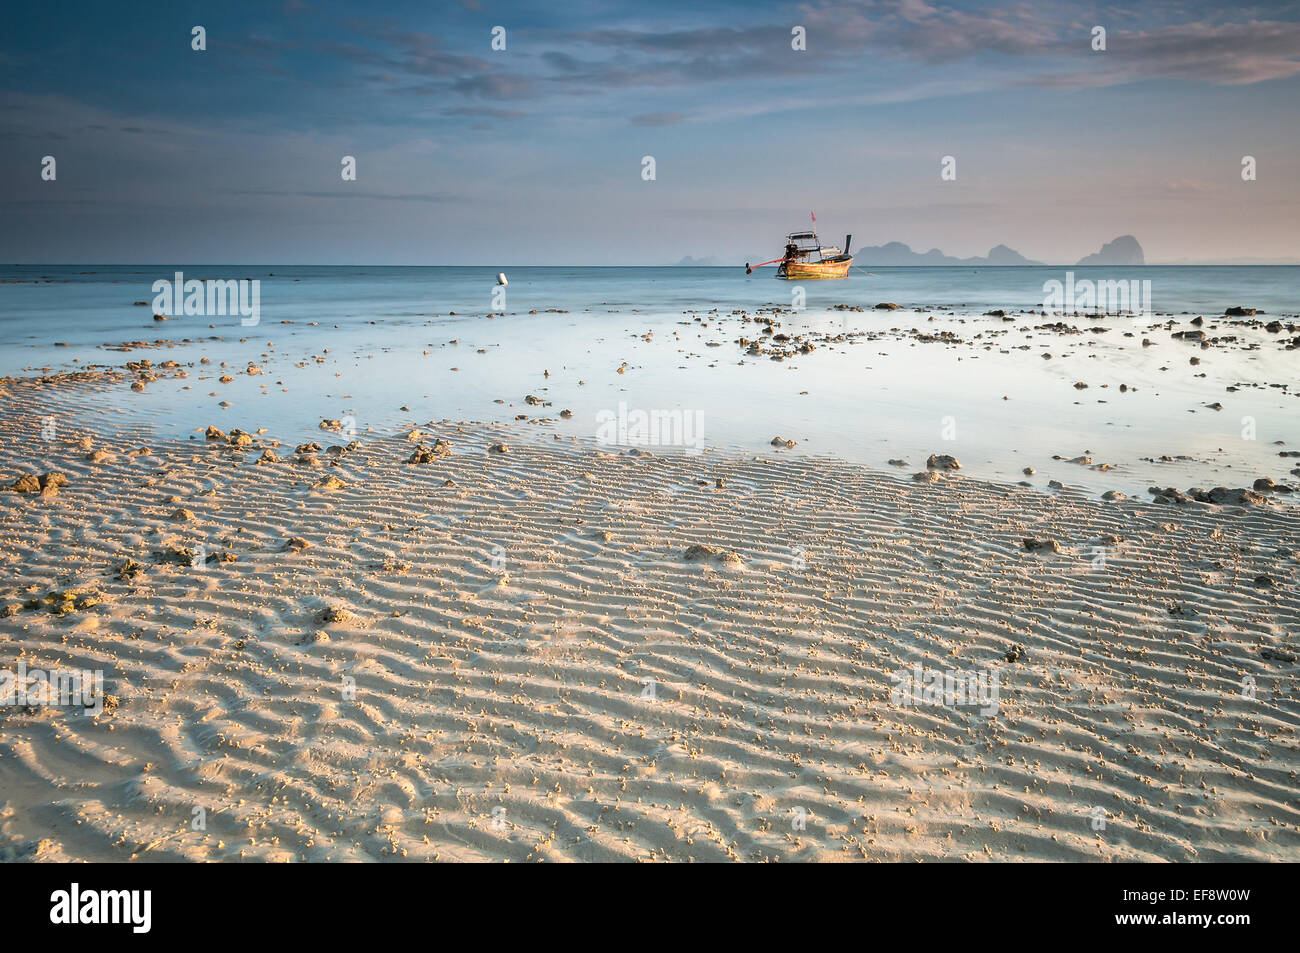 Thailand, Trang, Amphoe sikao, Sandy beach at low tide Stock Photo